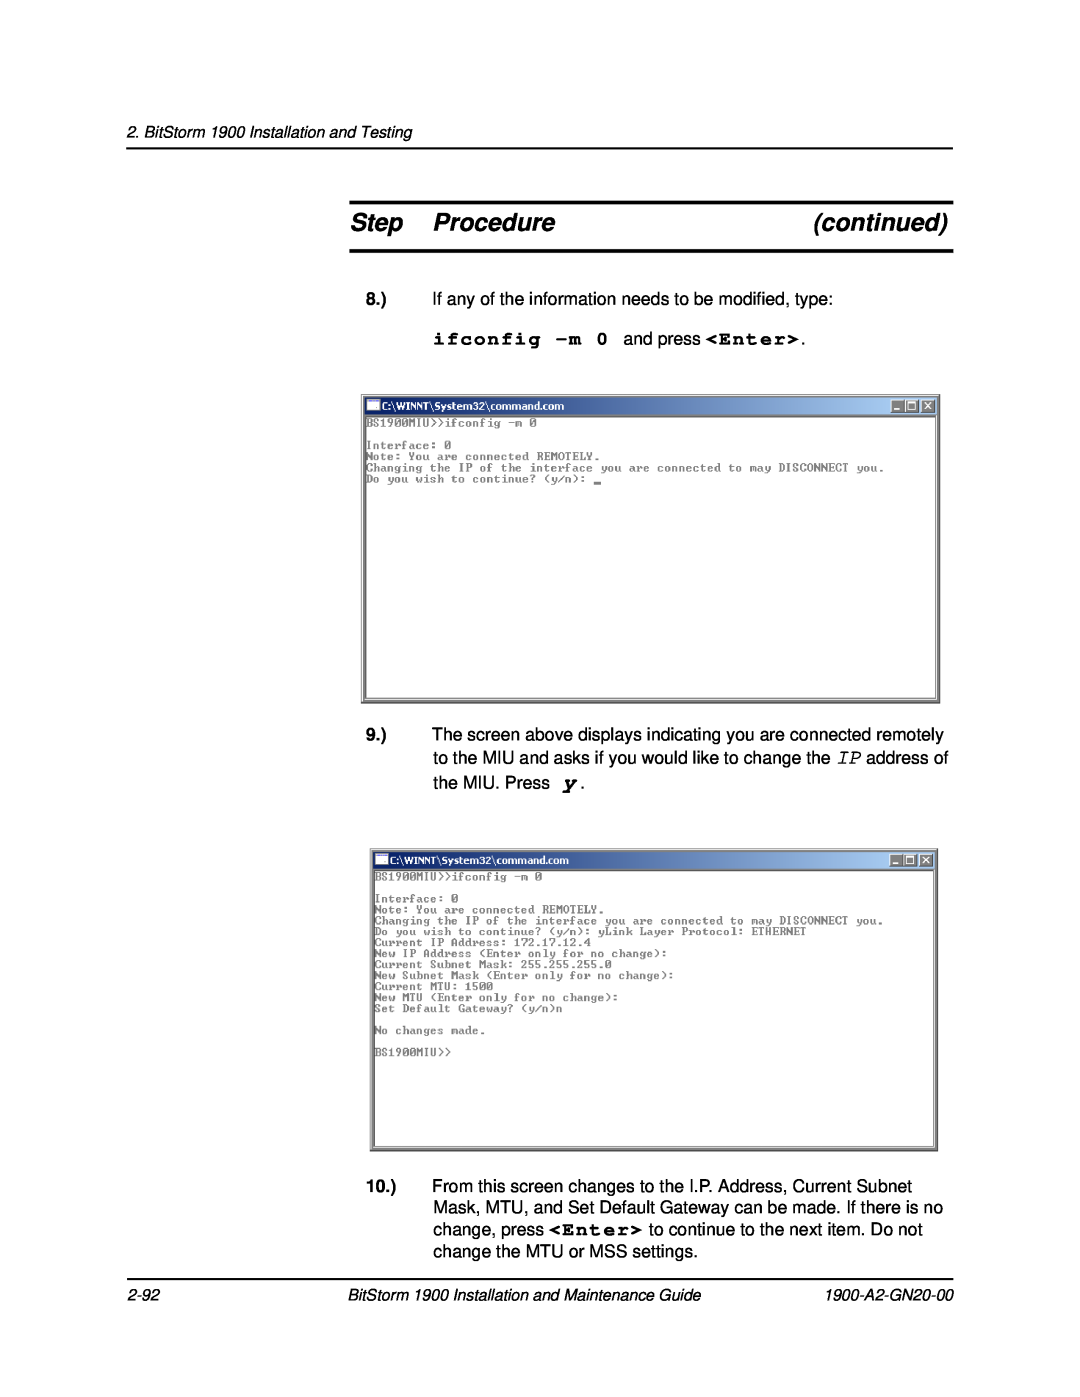 Paradyne 1900 manual Step Procedure, continued, ifconfig -m 0 and press Enter 